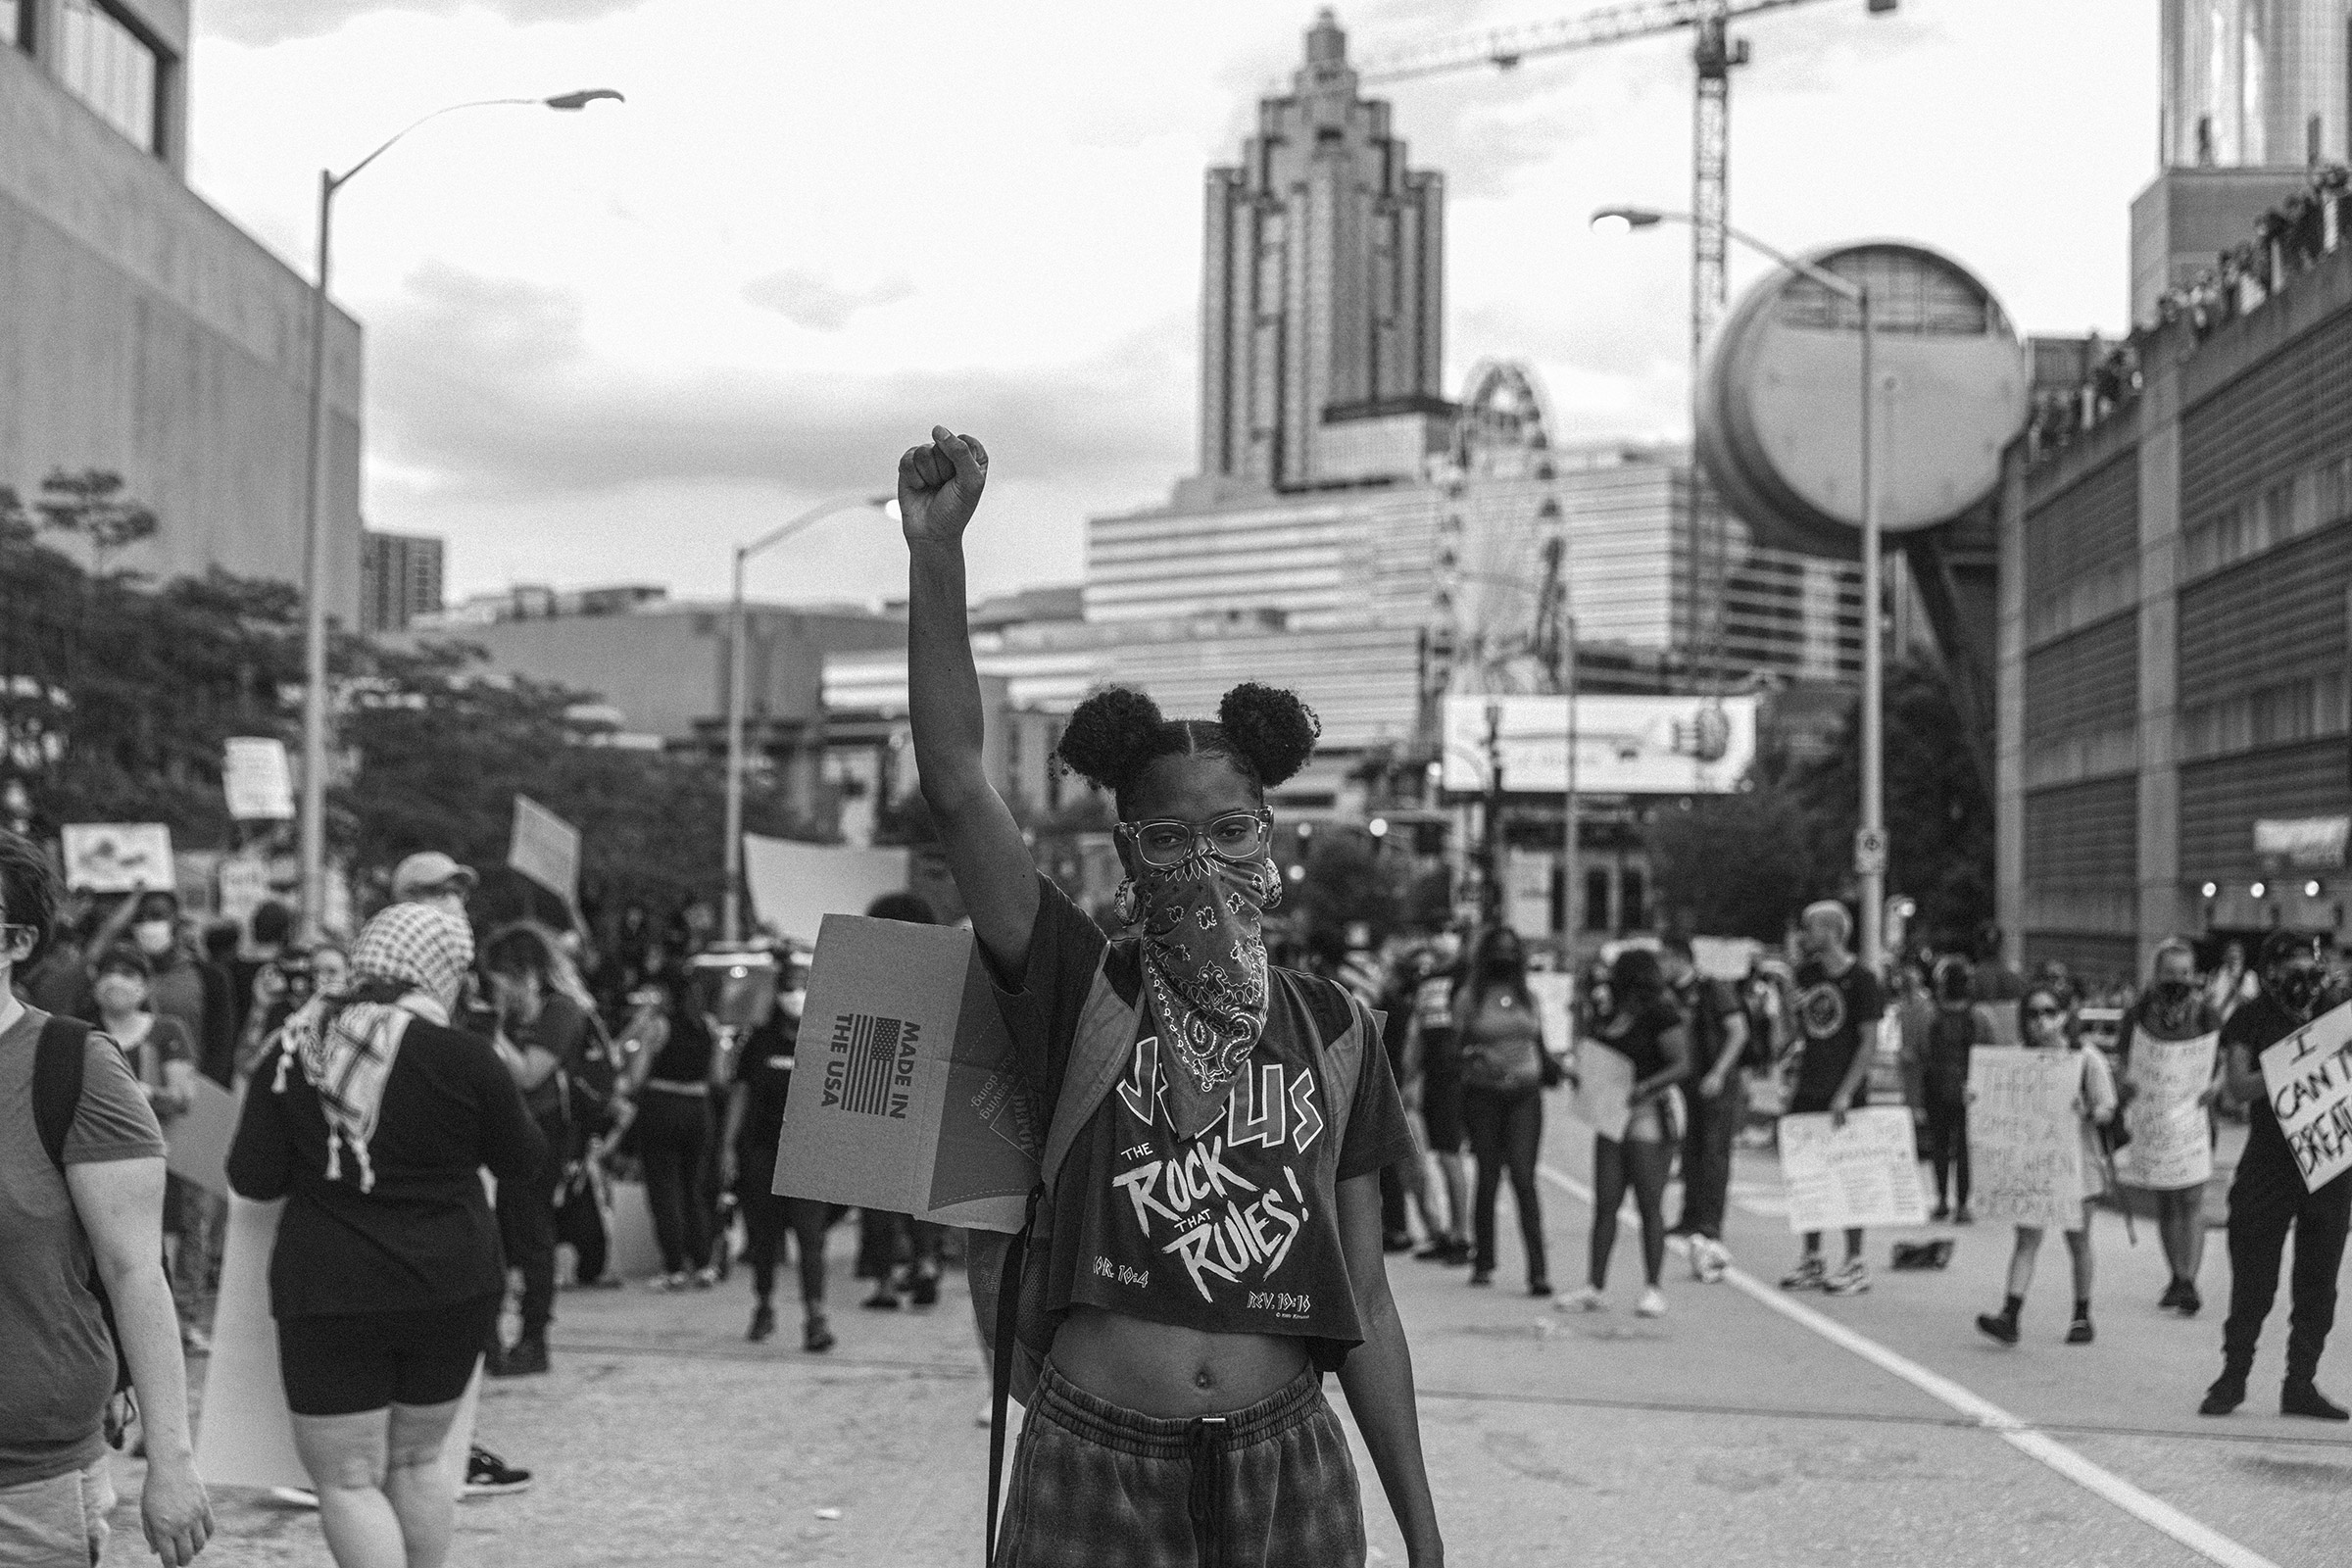 “Being in the midst of the action and seeing so much passion for the cause to eradicate racism is addictive.” (Lynsey Weatherspoon | Atlanta)